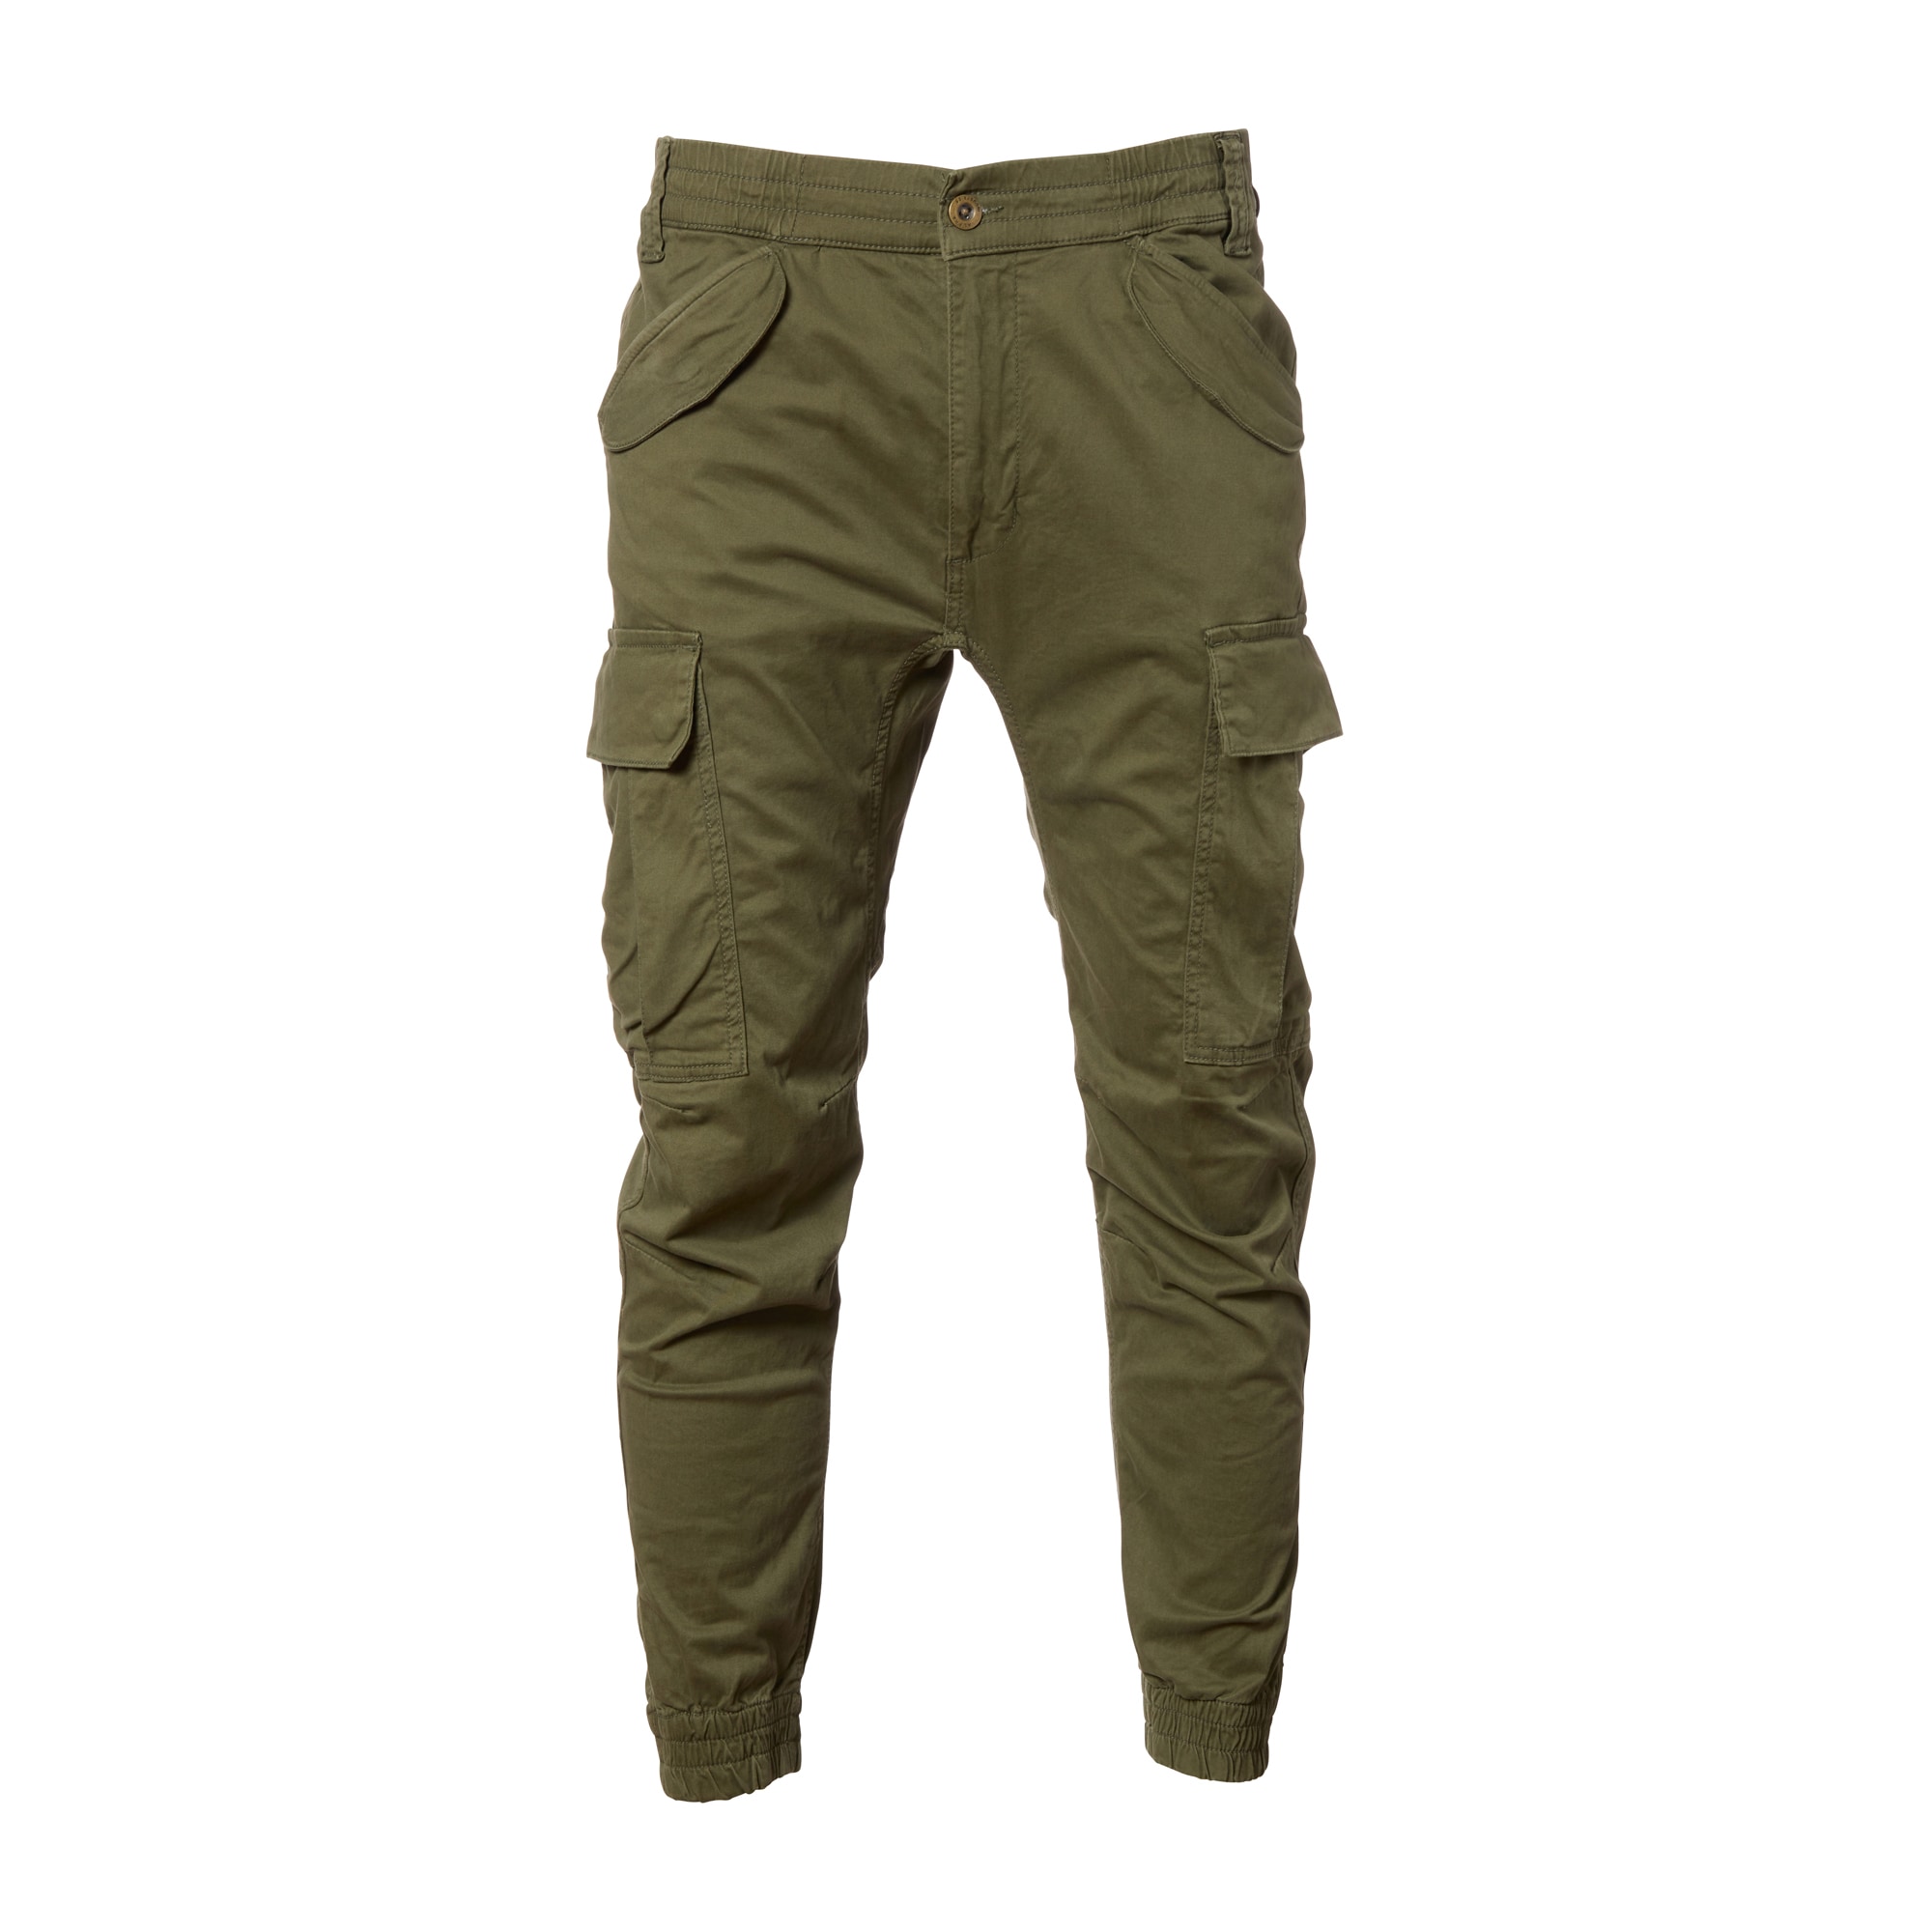 the dark ASMC Pants olive Purchase Alpha Industries Airman by